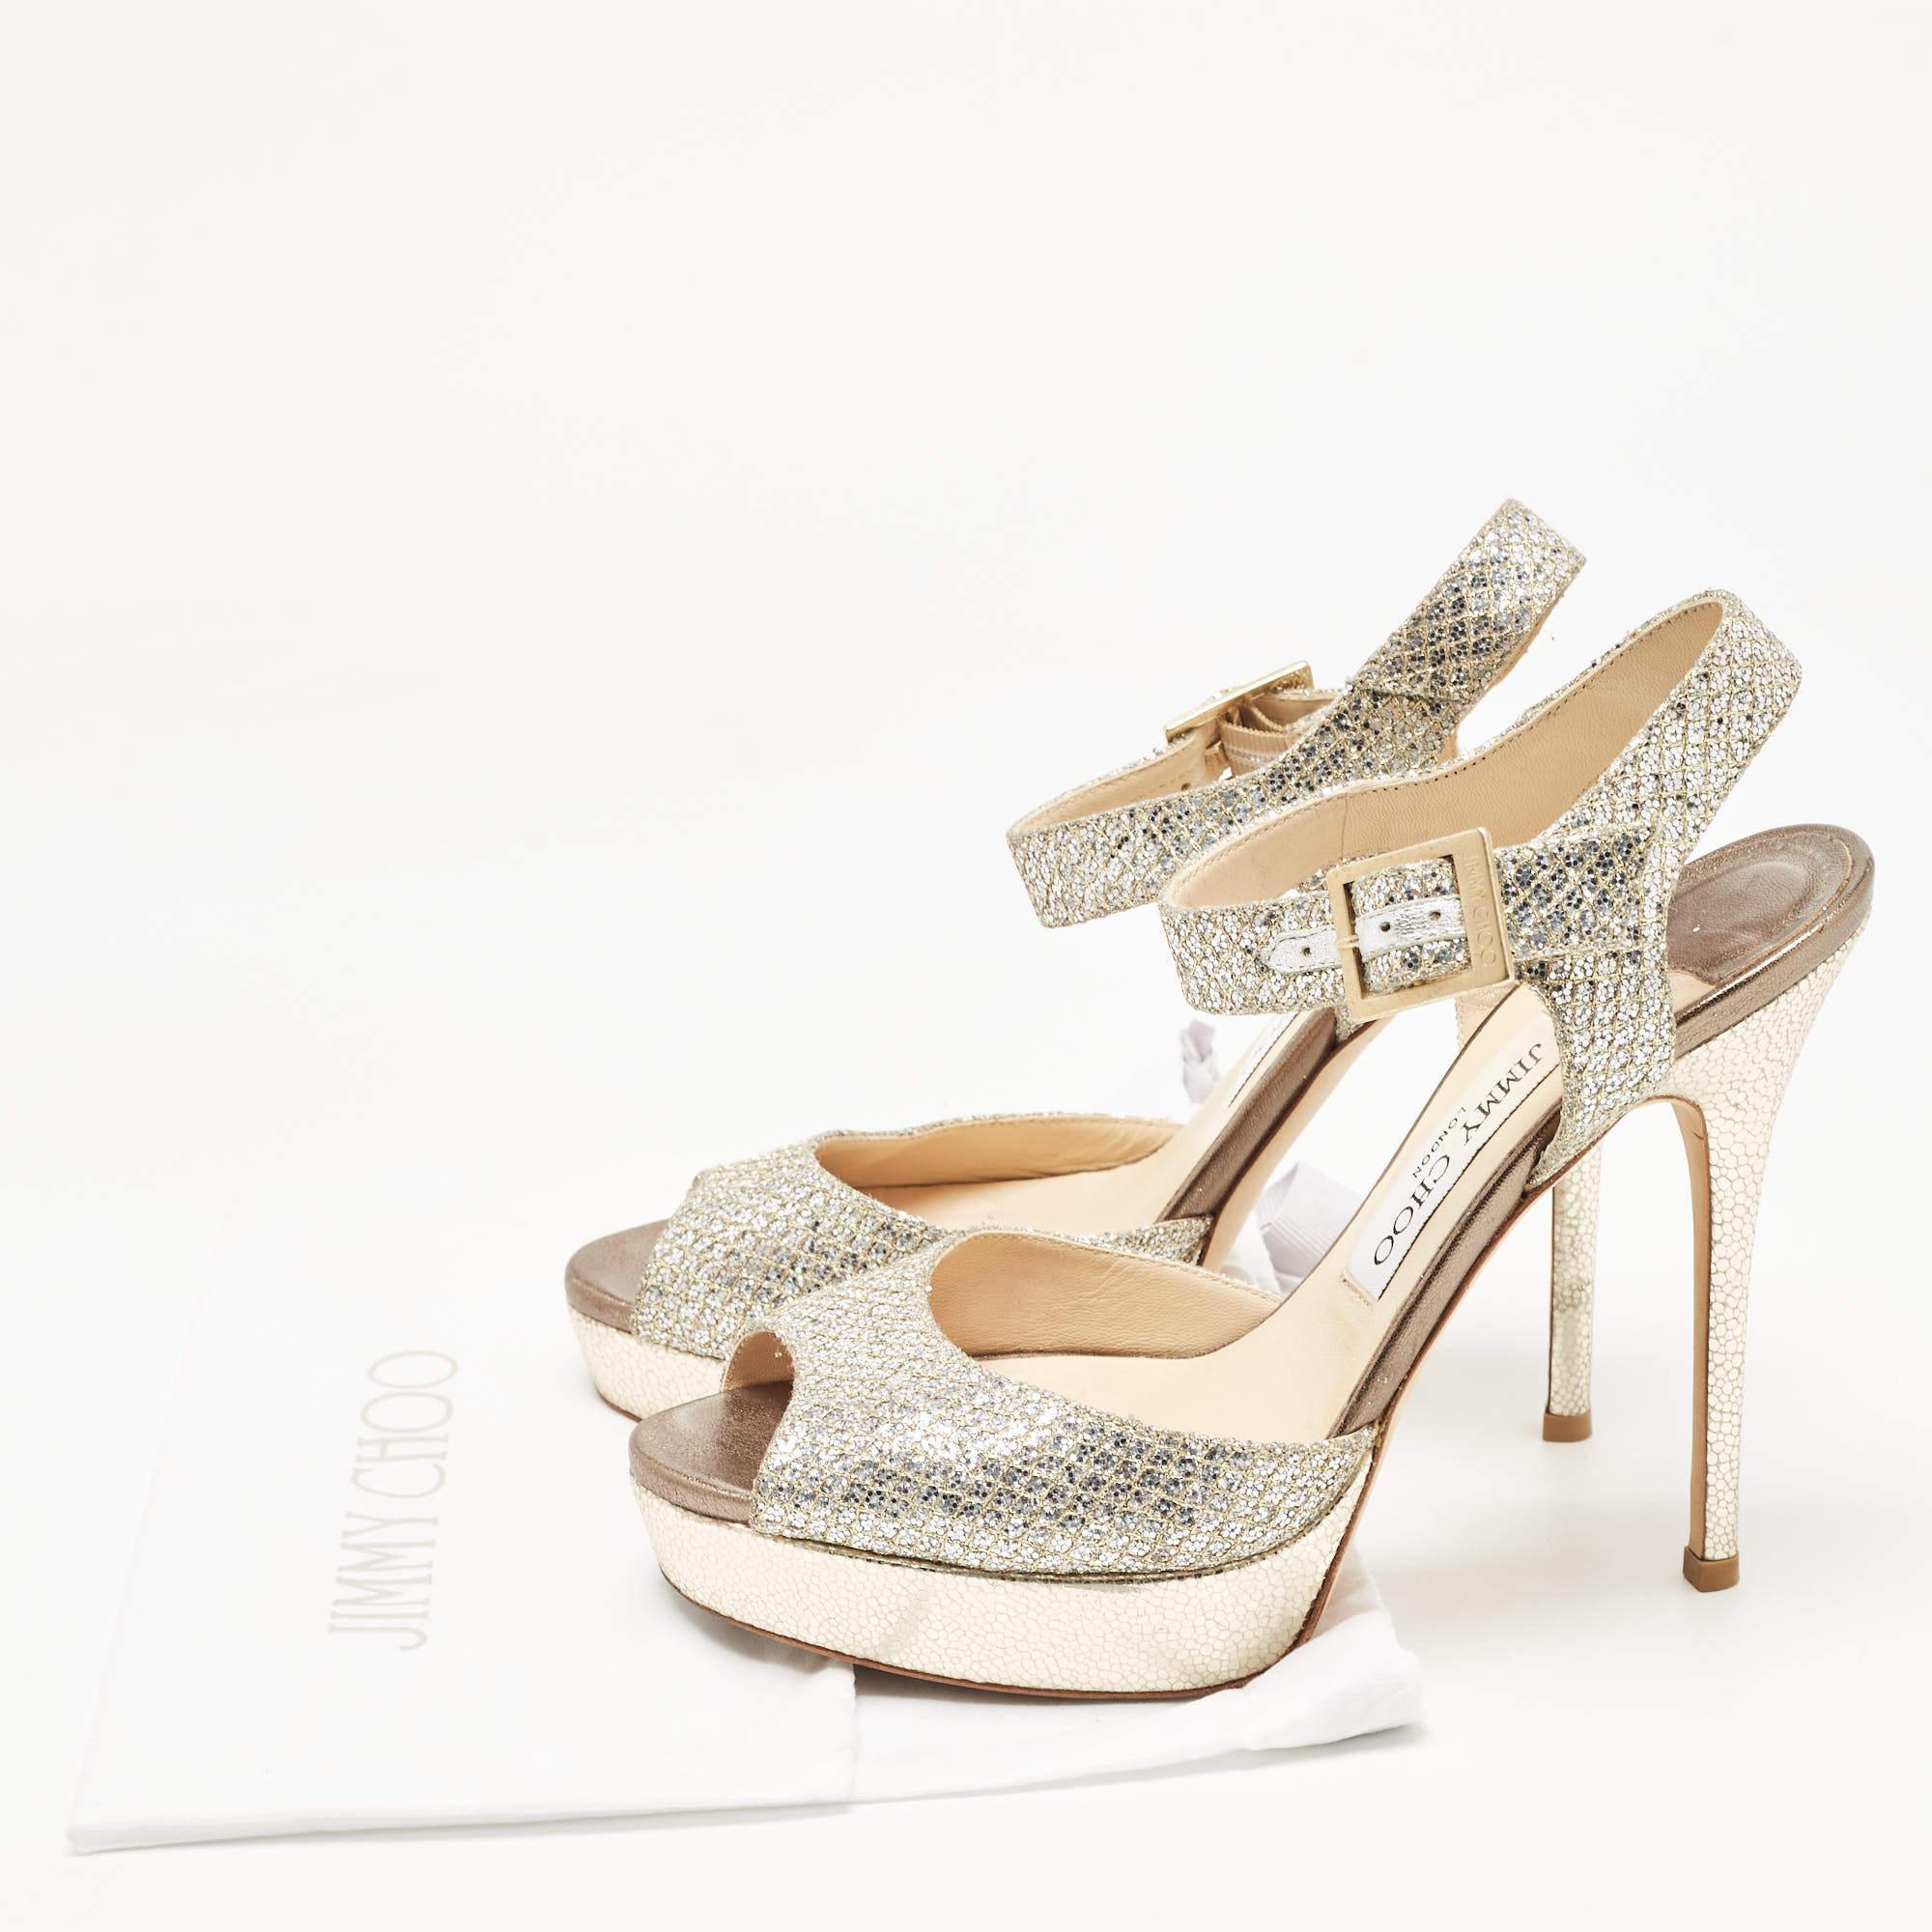 Jimmy Choo Silver/Gold Glitter and Leather Platform Ankle Strap Sandals Size 38. For Sale 5